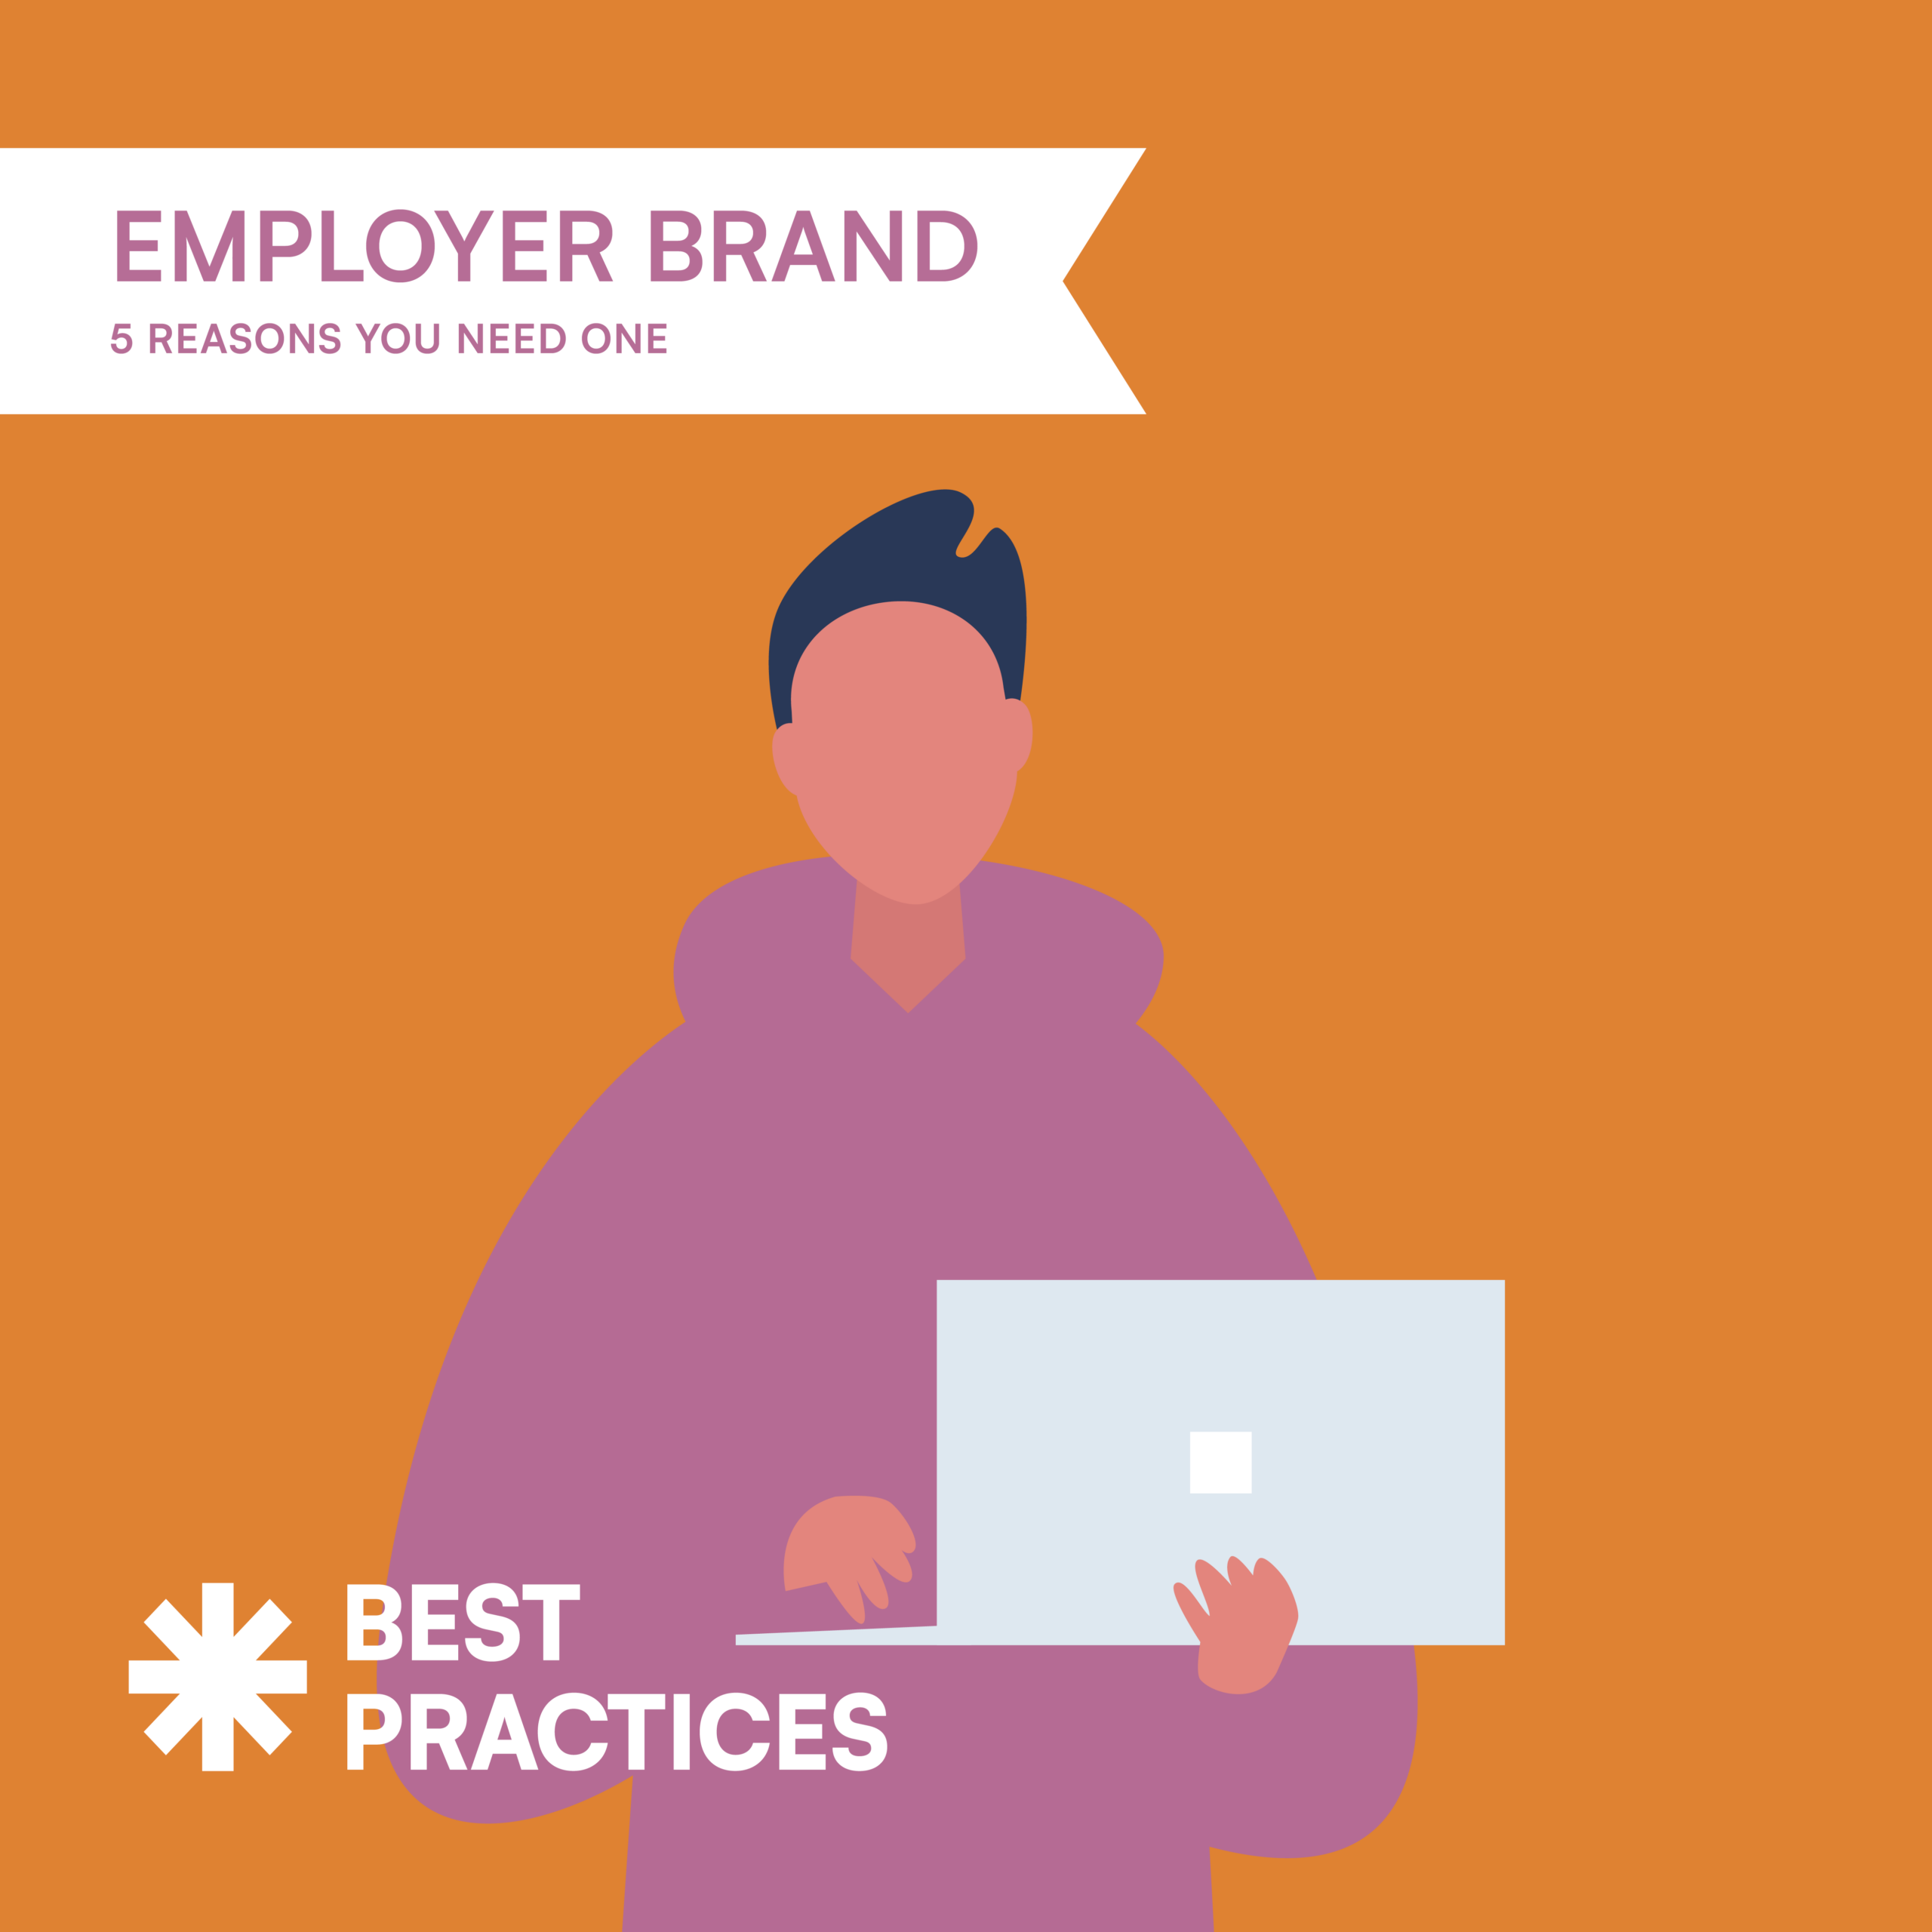 Employer brand promise, employee at computer